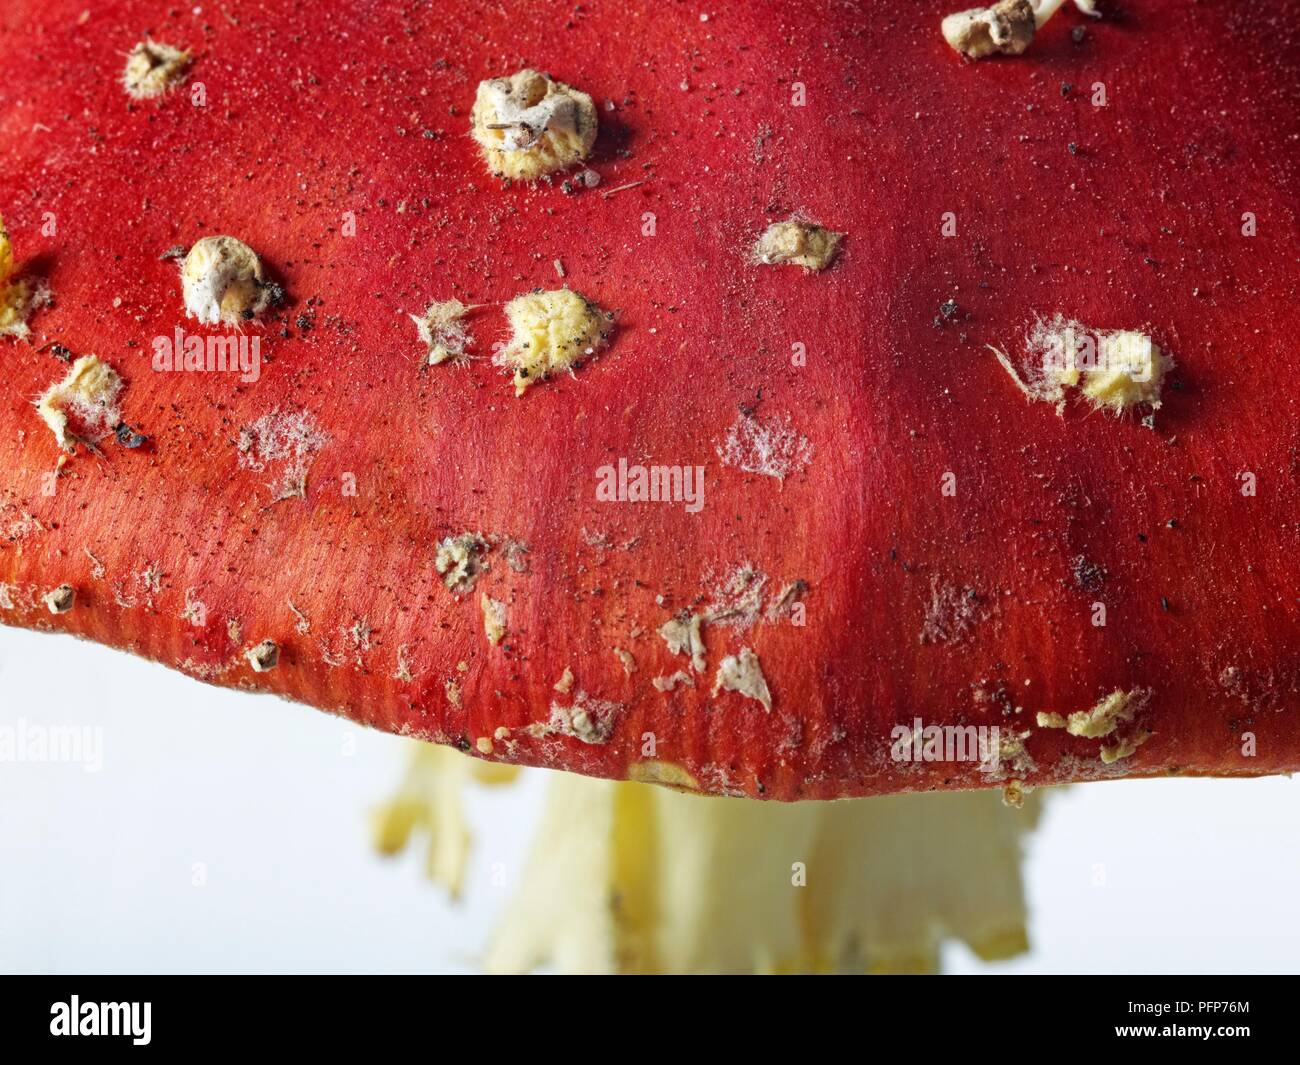 Amanita muscaria (Fly agaric), close-up on cap Stock Photo